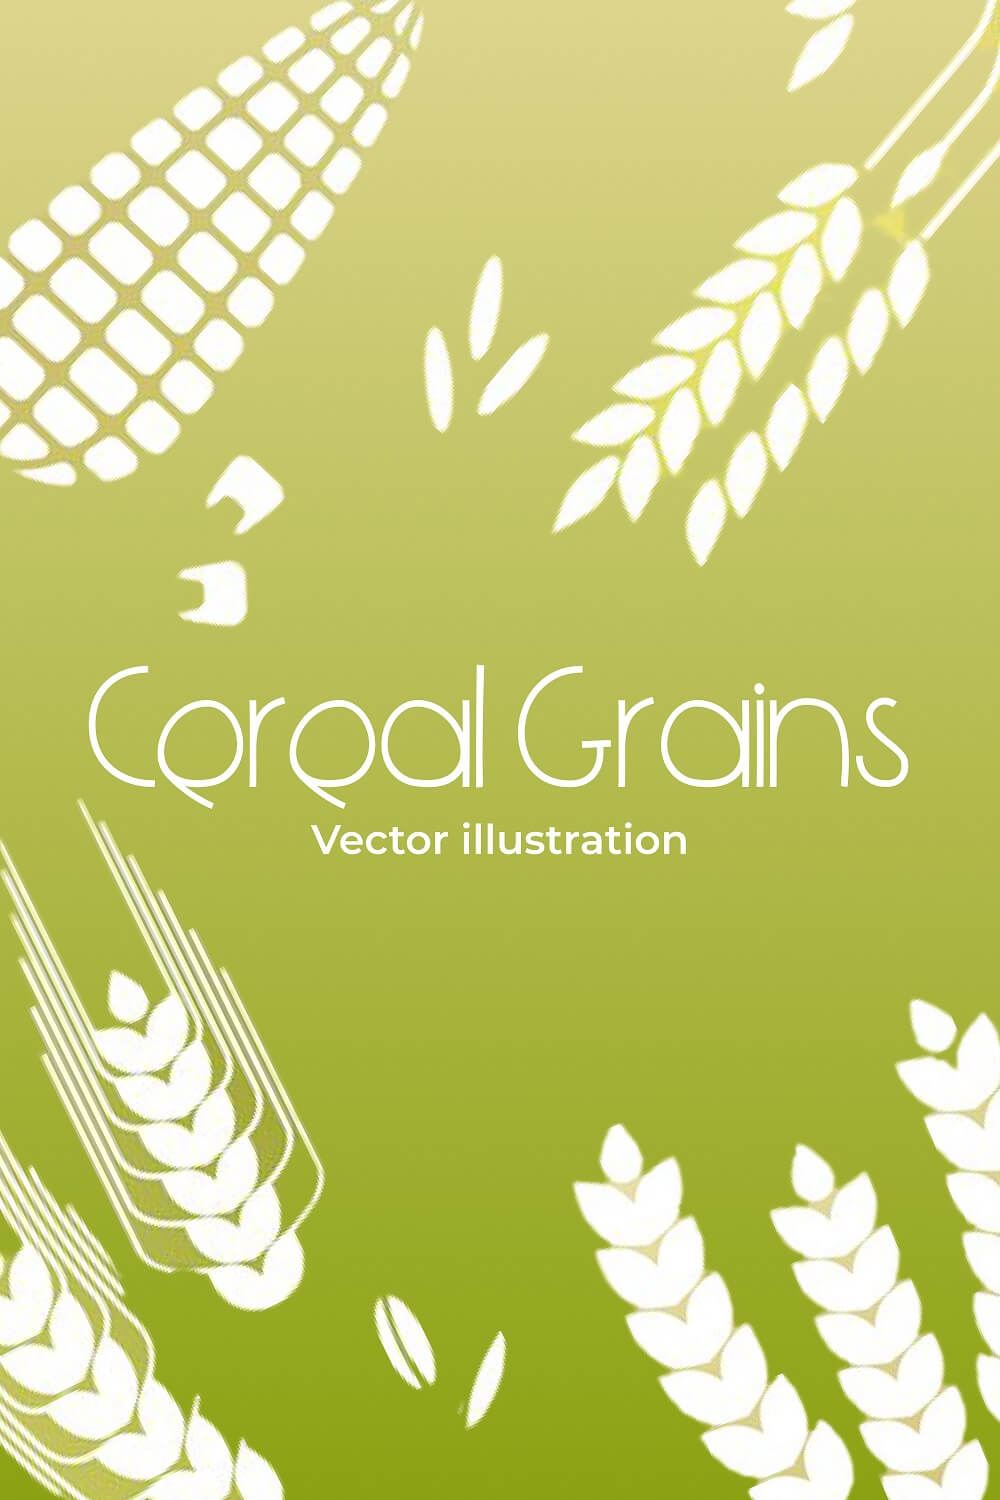 White grains are drawn on a green background.